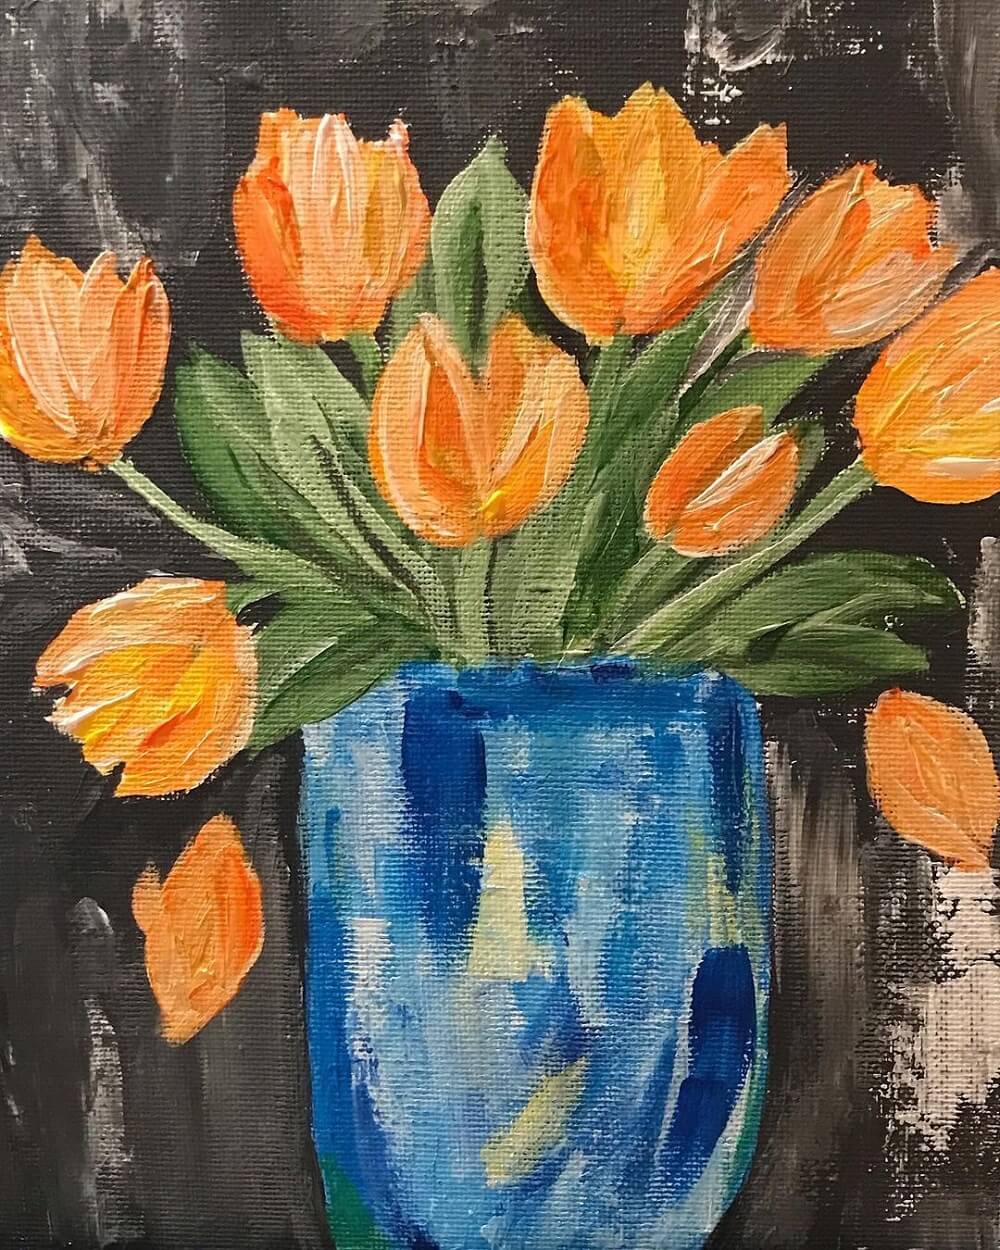 Spring still life with orange tulips and a blue vase painted in acrylic on canvas.